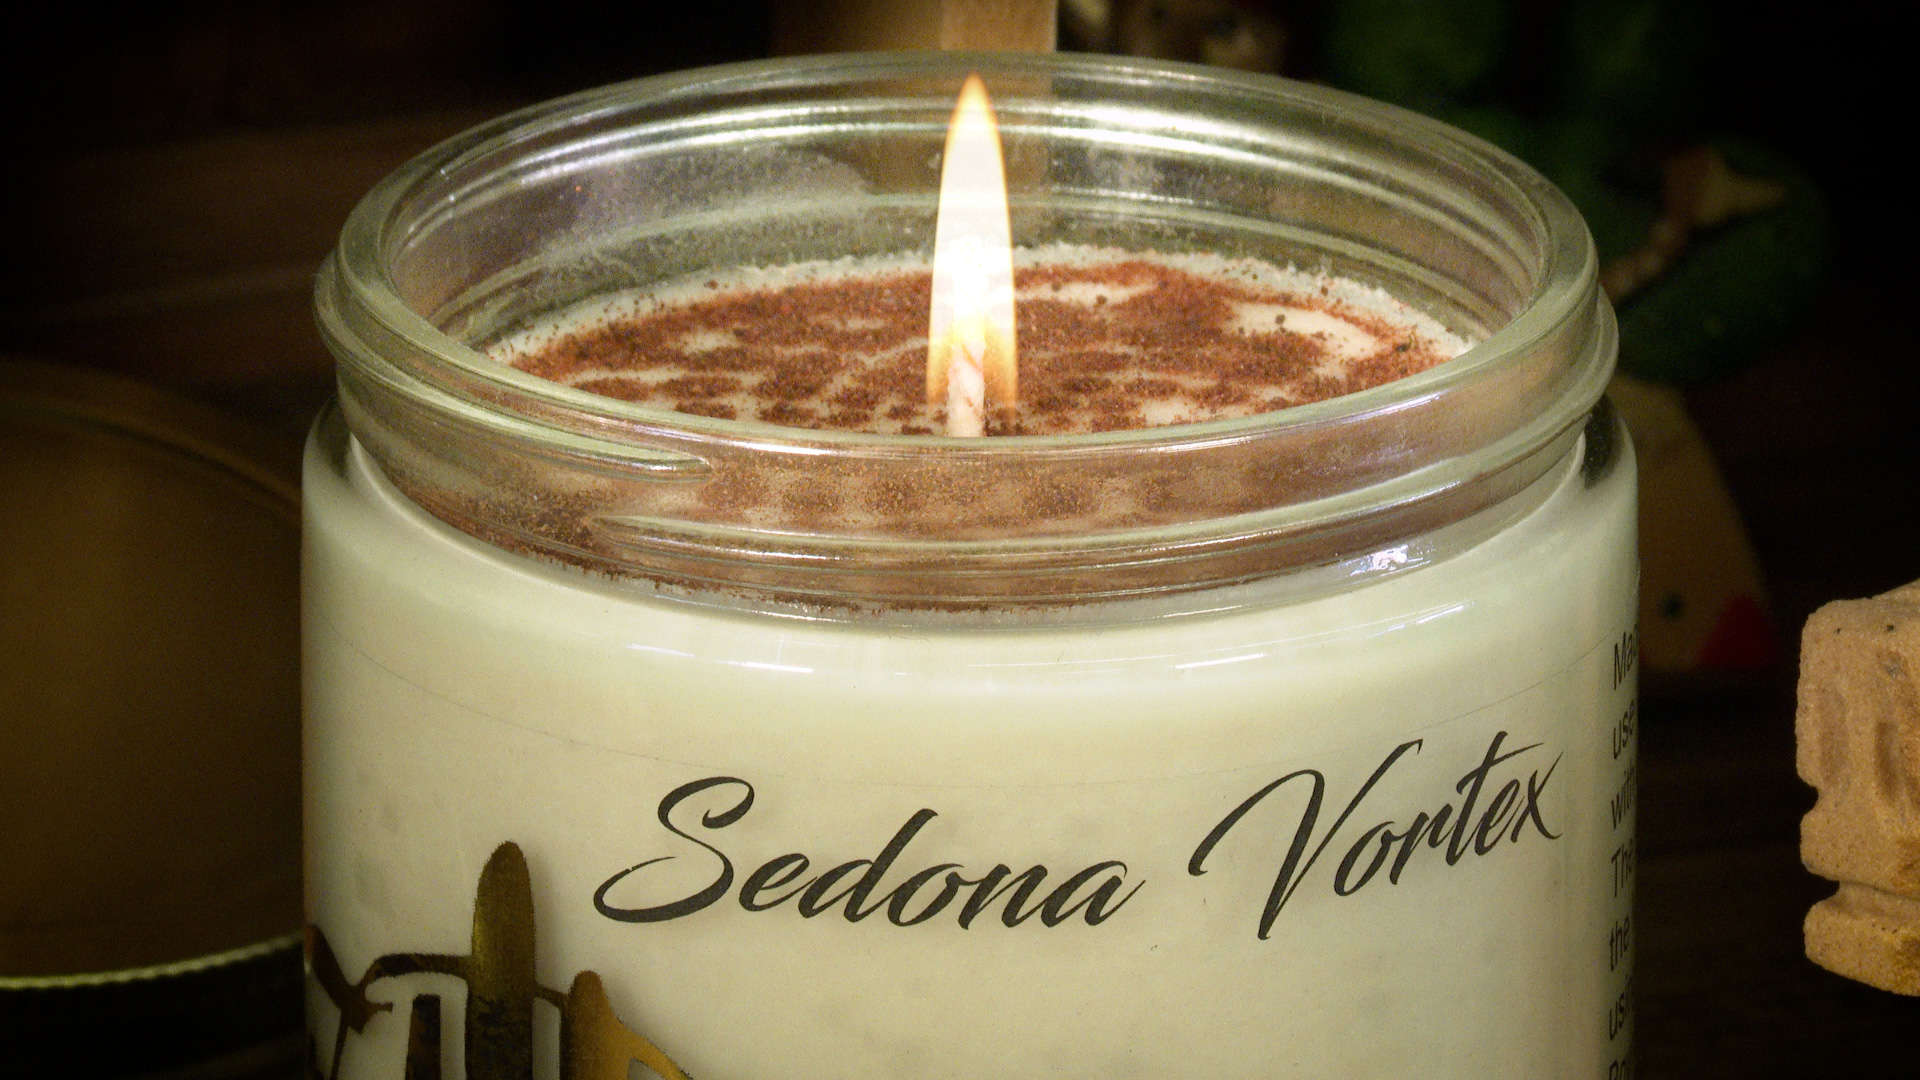 Sedona vortex candle available at Wine, Whiskey and Whatnot in Cottonwood